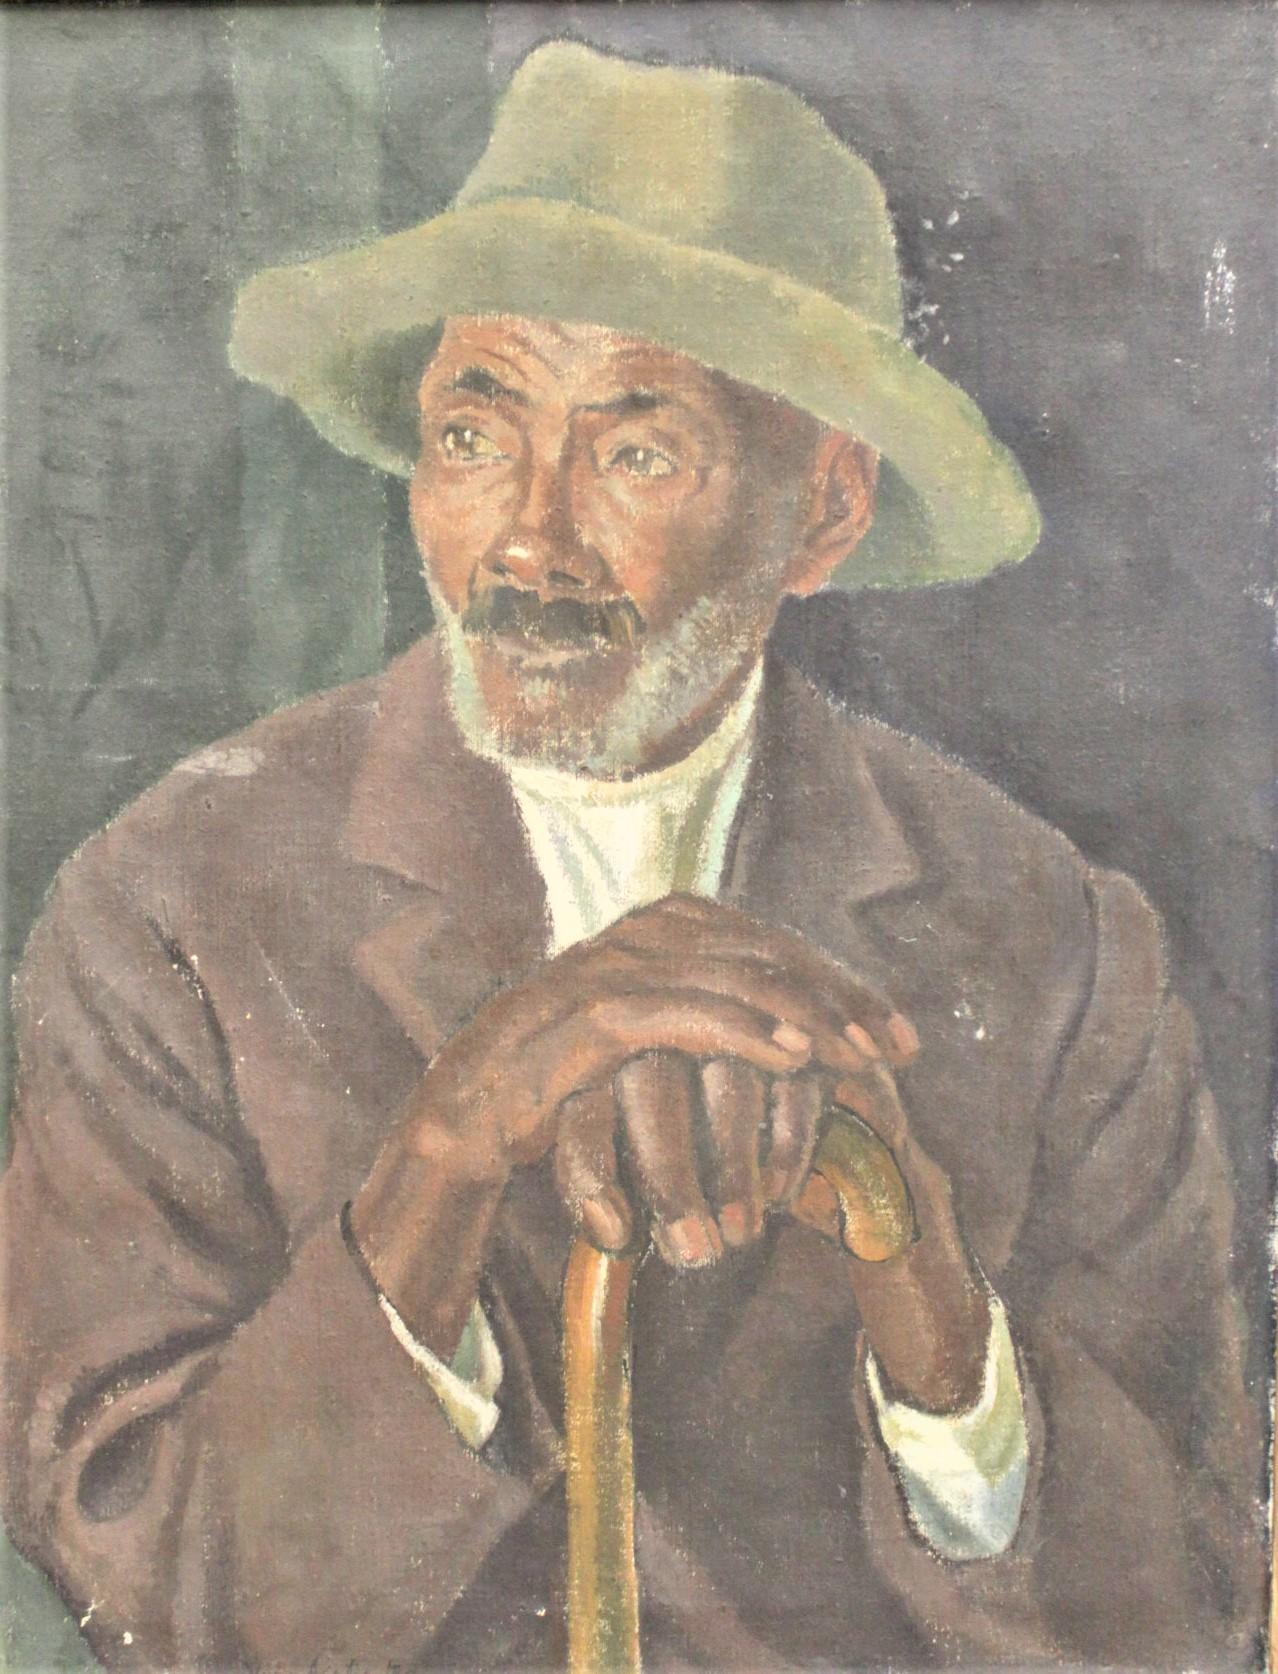 This pair of oil paintings on canvas are done by the well known portrait and landscape Russian artist, Vera Alabaster in circa 1940 in a Folk Art style. The paintings depict a Jamaican man and is titled 